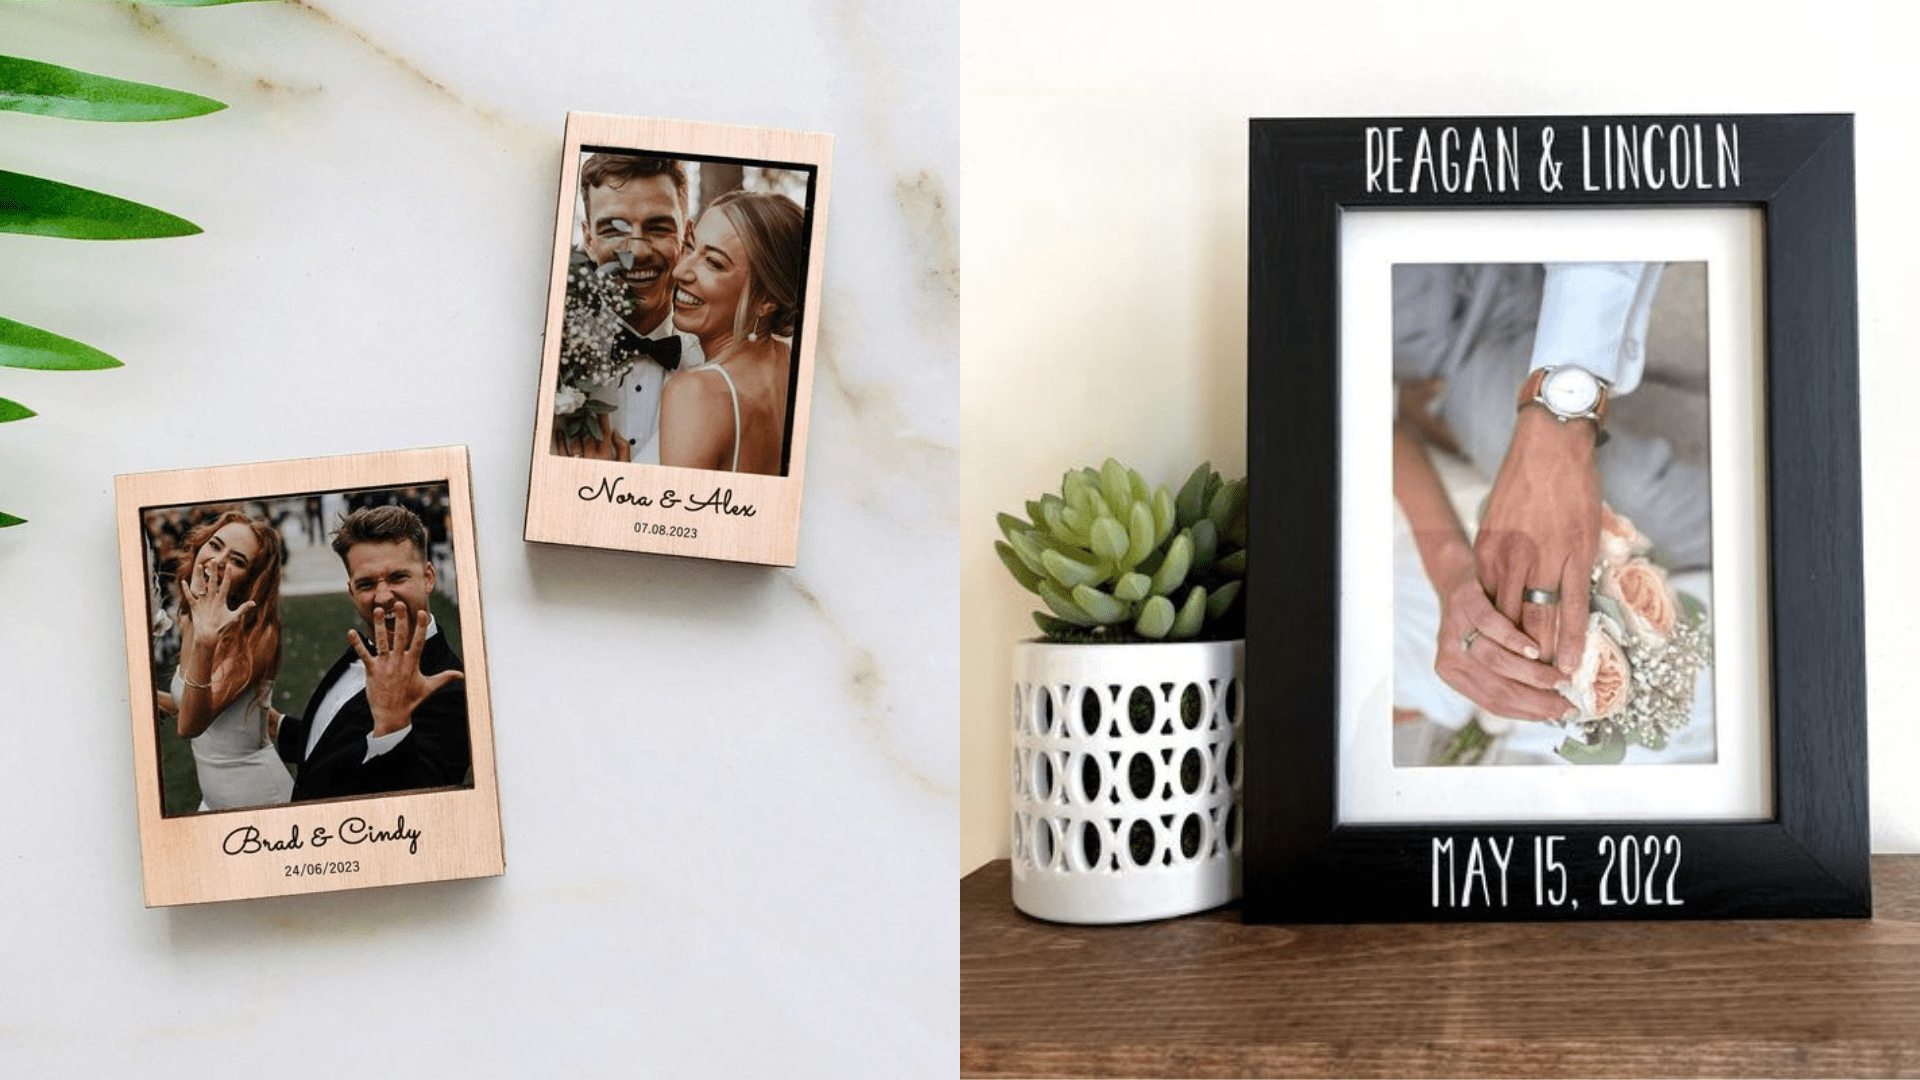 personalized picture frame letmeanalyze-min